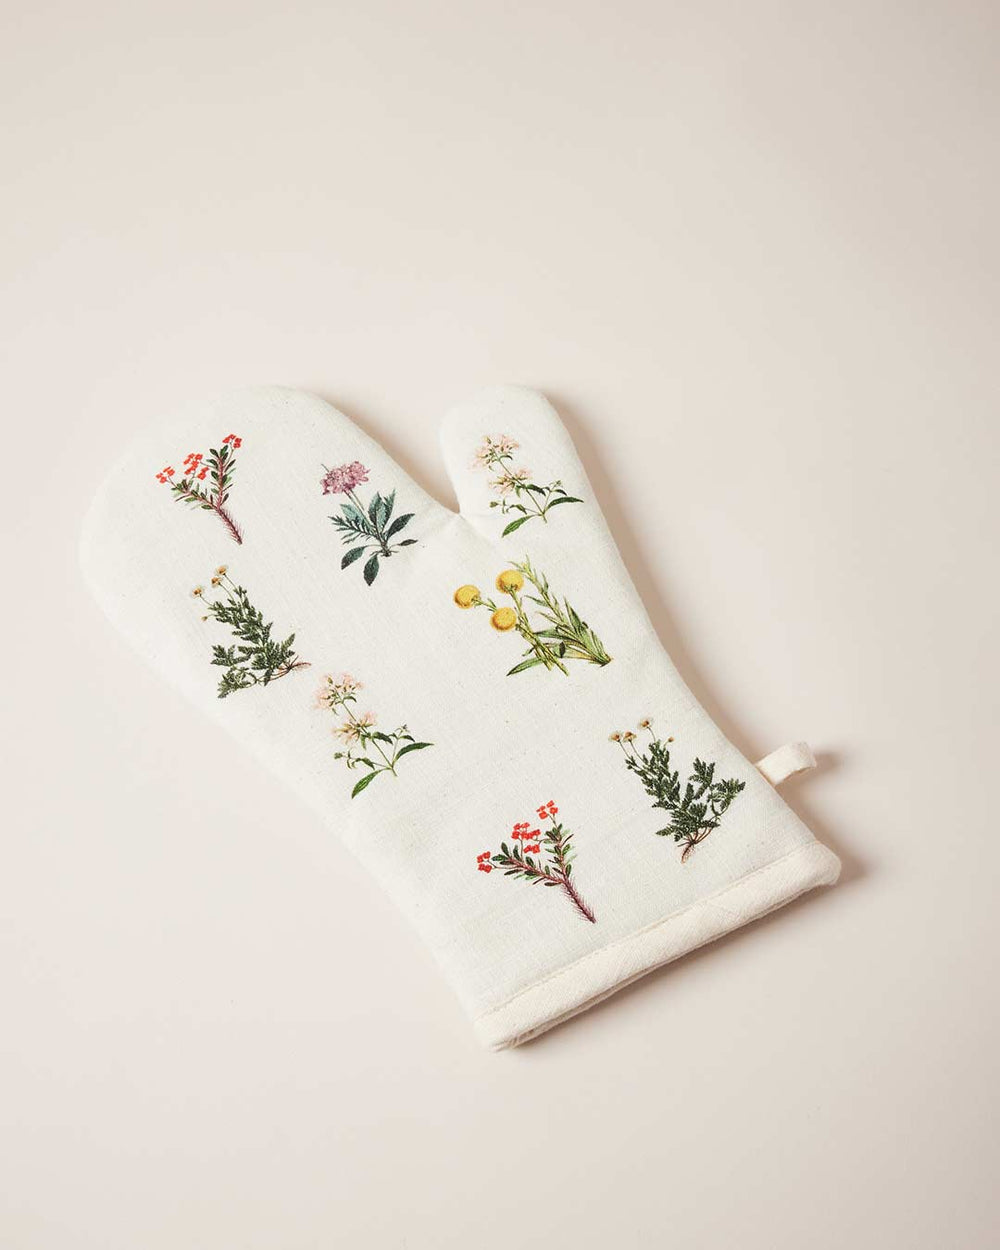 Farmhouse Style Oven Mitts Set of 2. Soft Floral Oven Gloves. Shabby Chic  Baking Gloves. Oven Mittens. Kitchen Gloves. Christmas Gift 